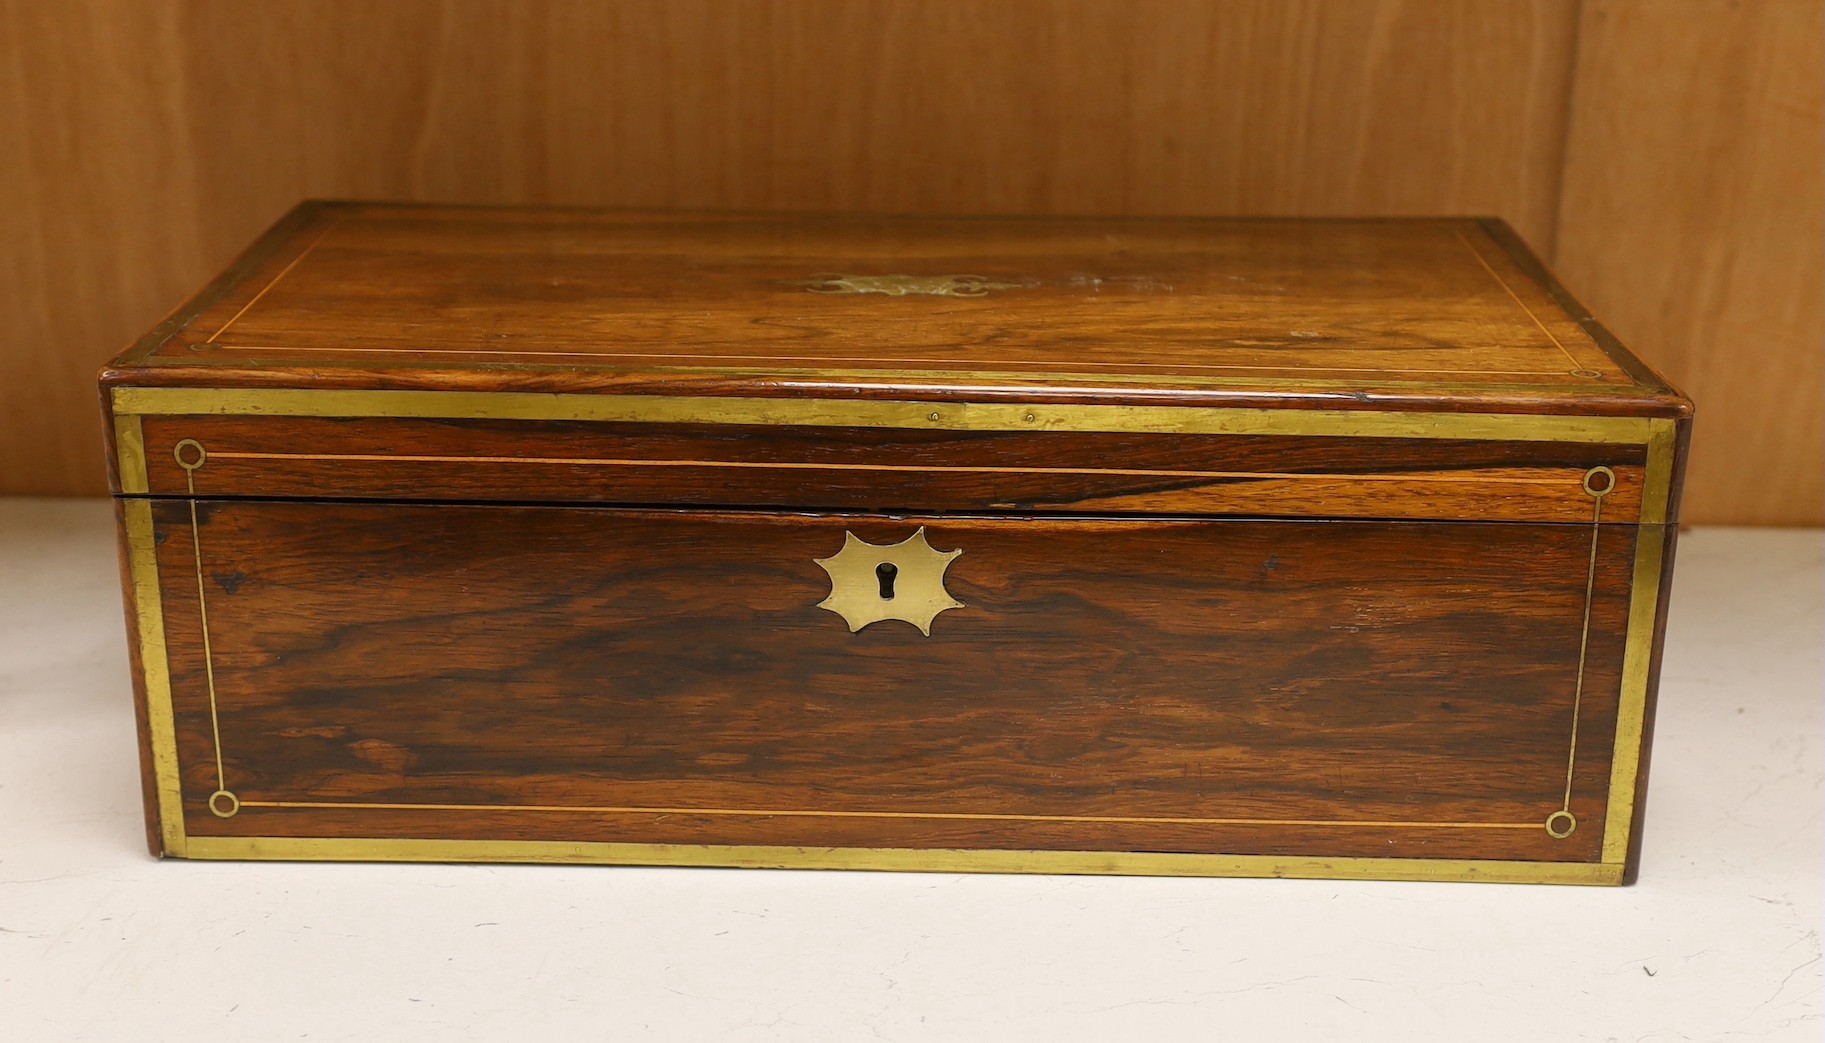 A Regency brass inlaid rosewood writing slope, 51 cms wide x 17 cms high.